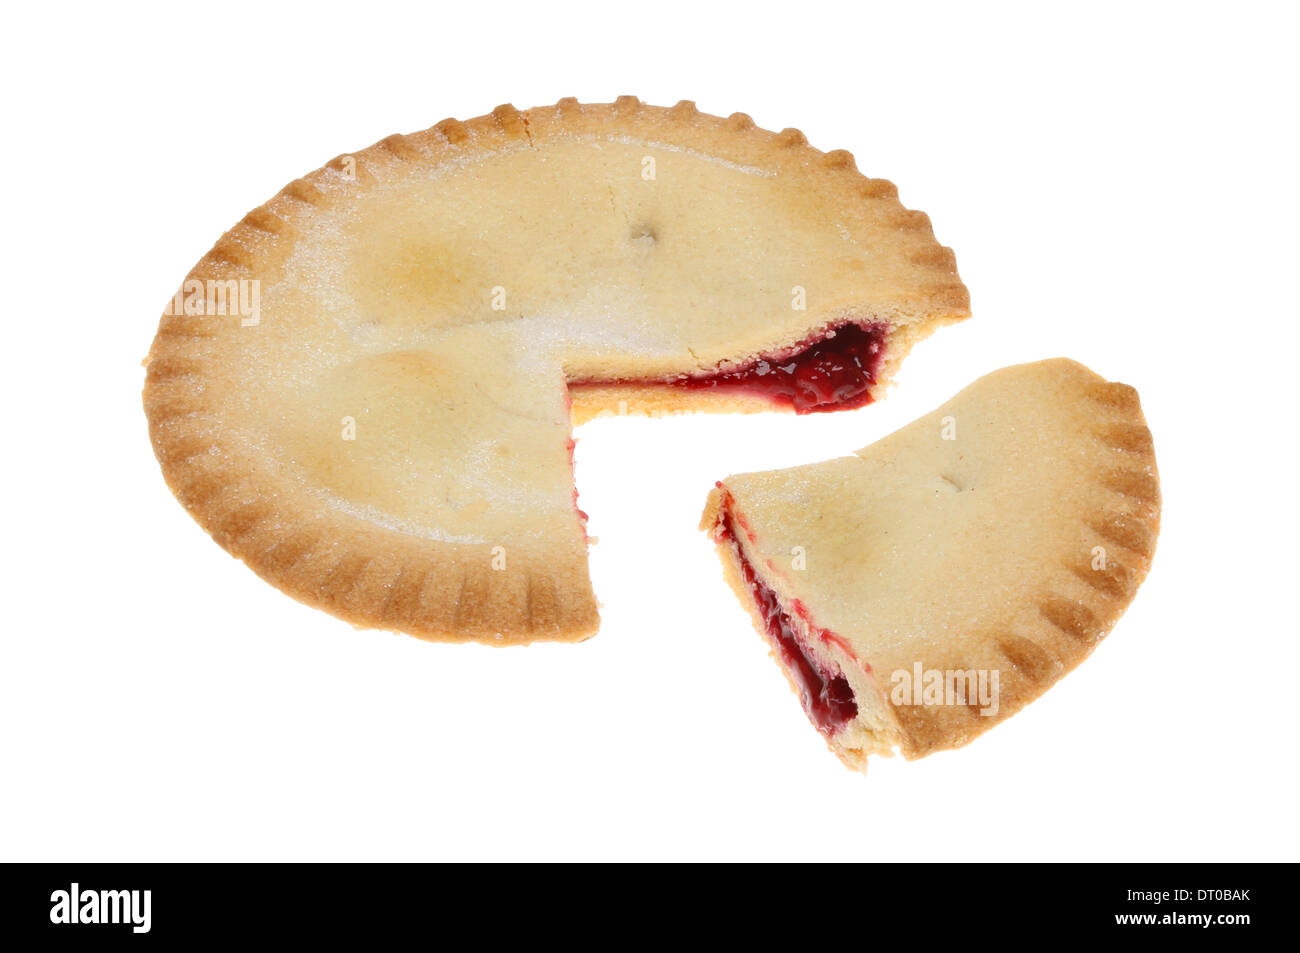 Cherry pie with a slice cut out isolated against white Stock Photo